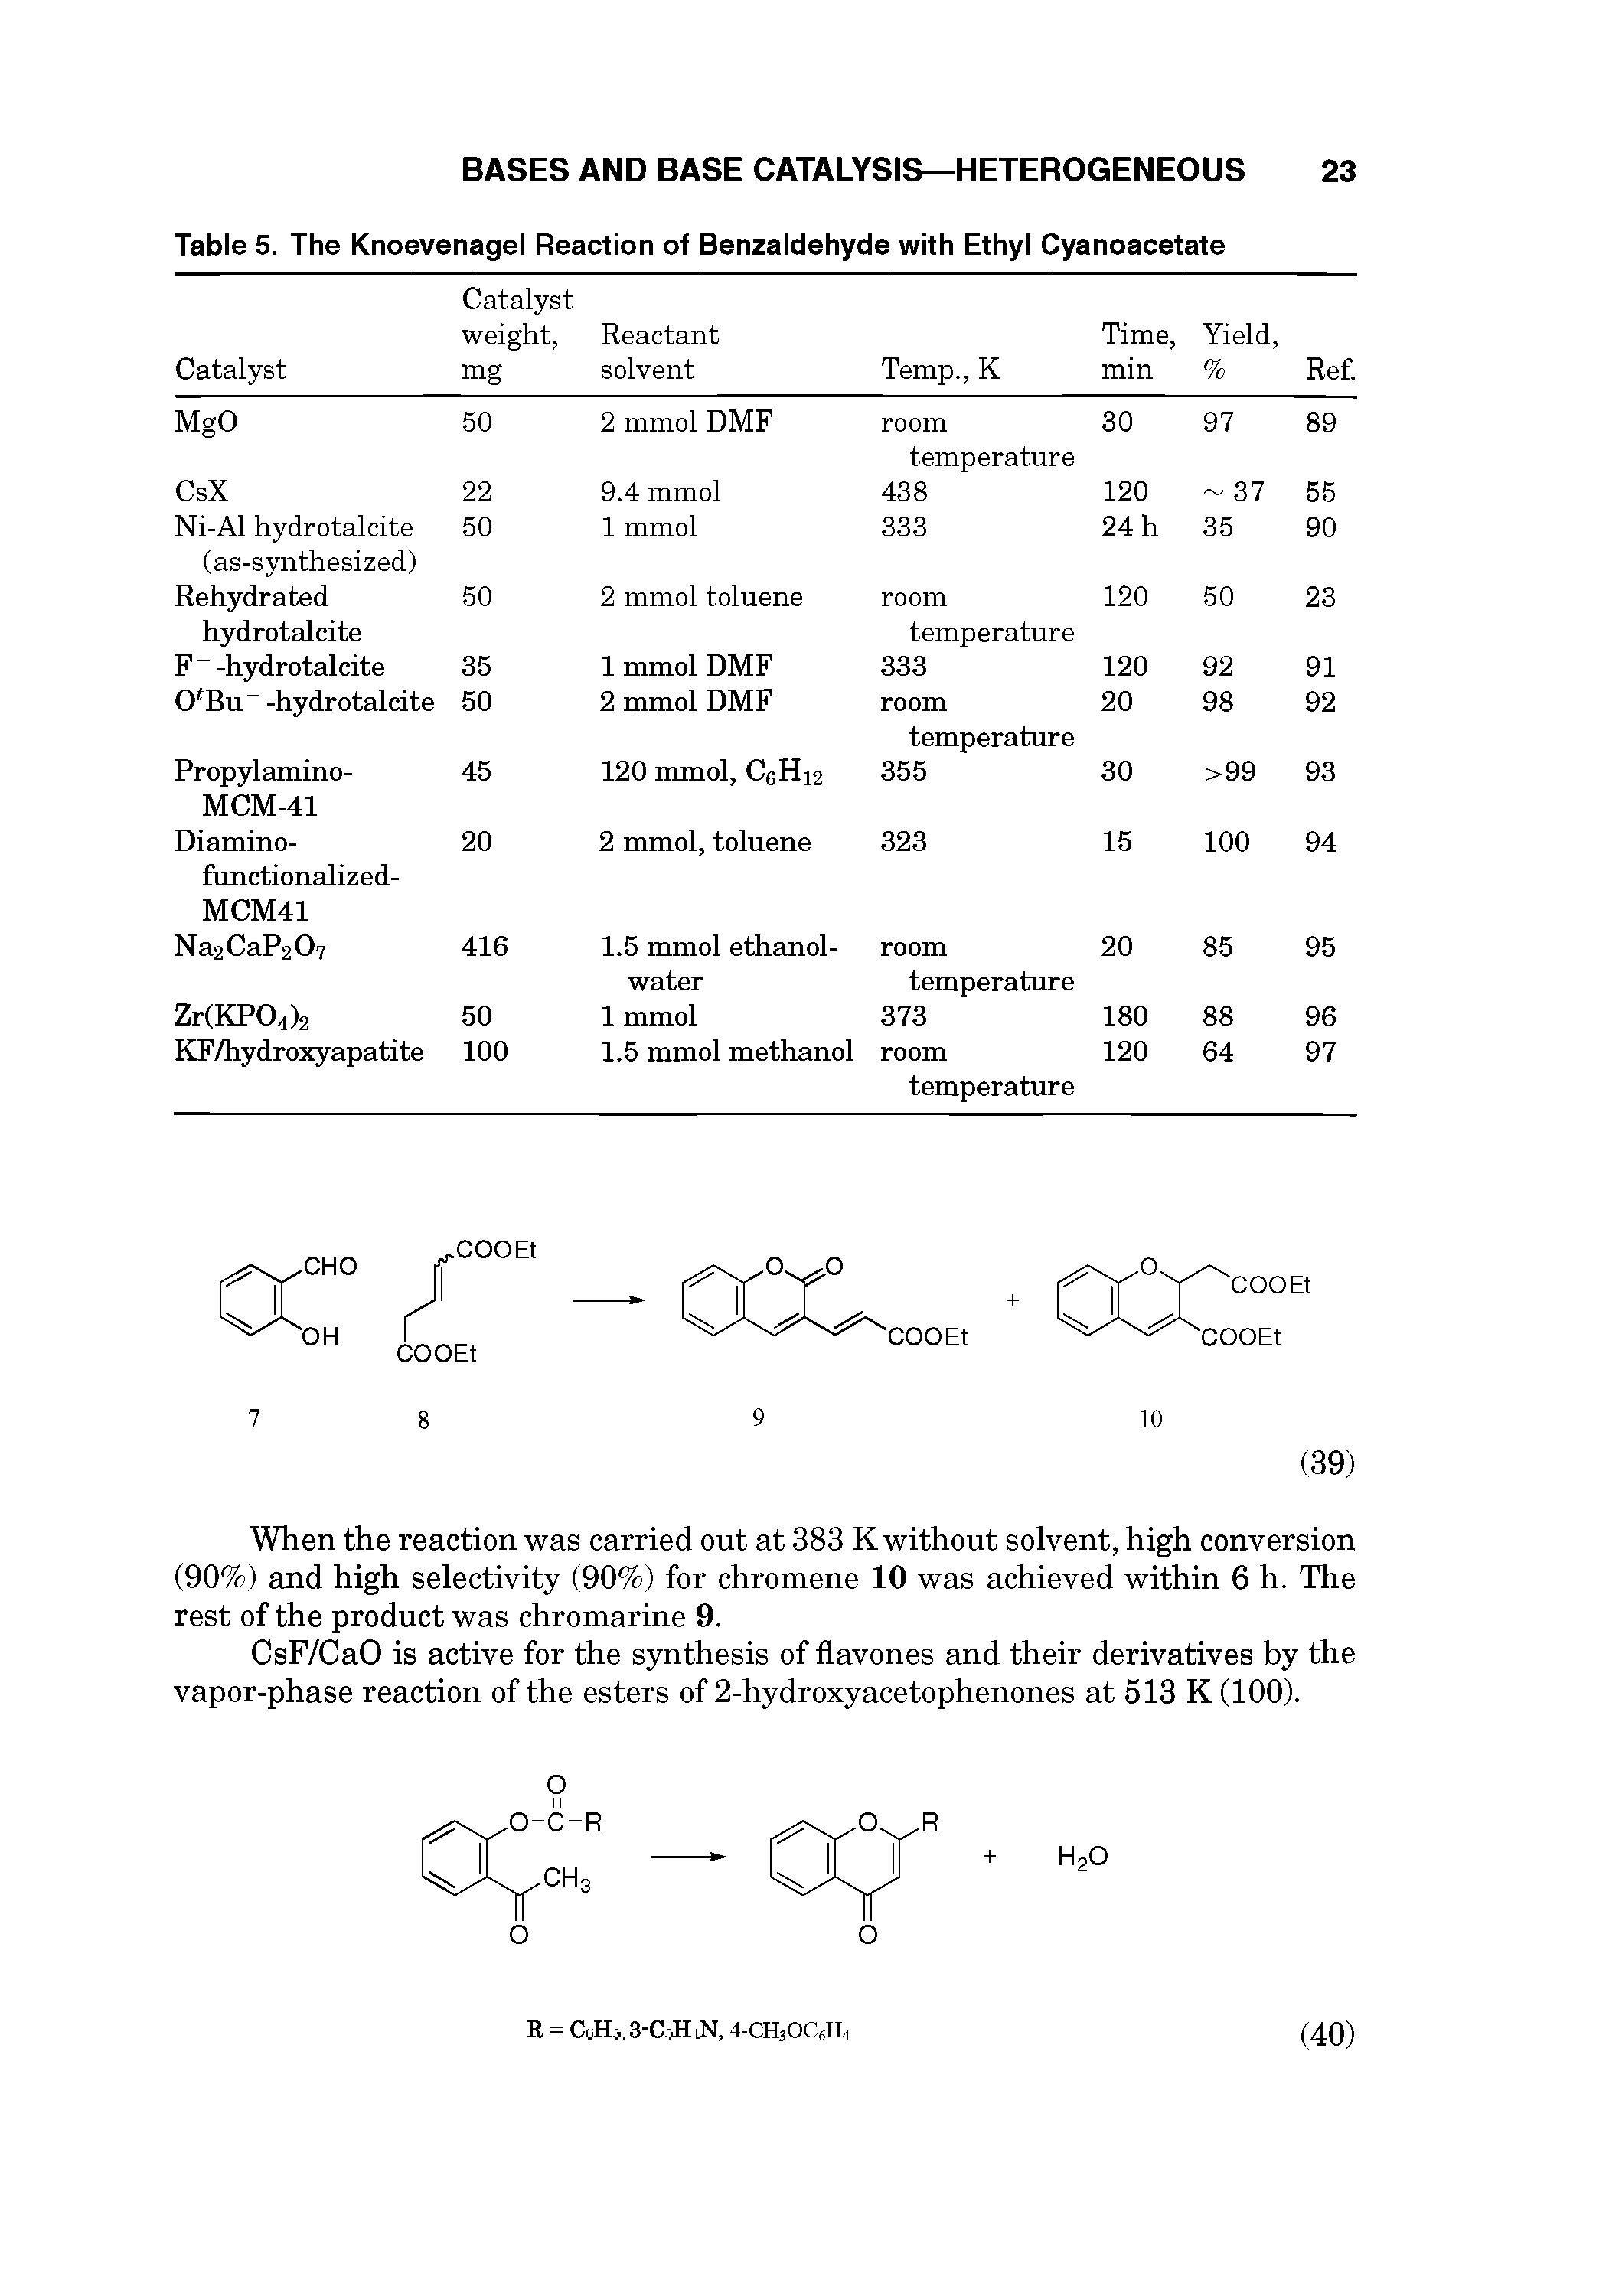 Table 5. The Knoevenagel Reaction of Benzaldehyde with Ethyl Cyanoacetate...